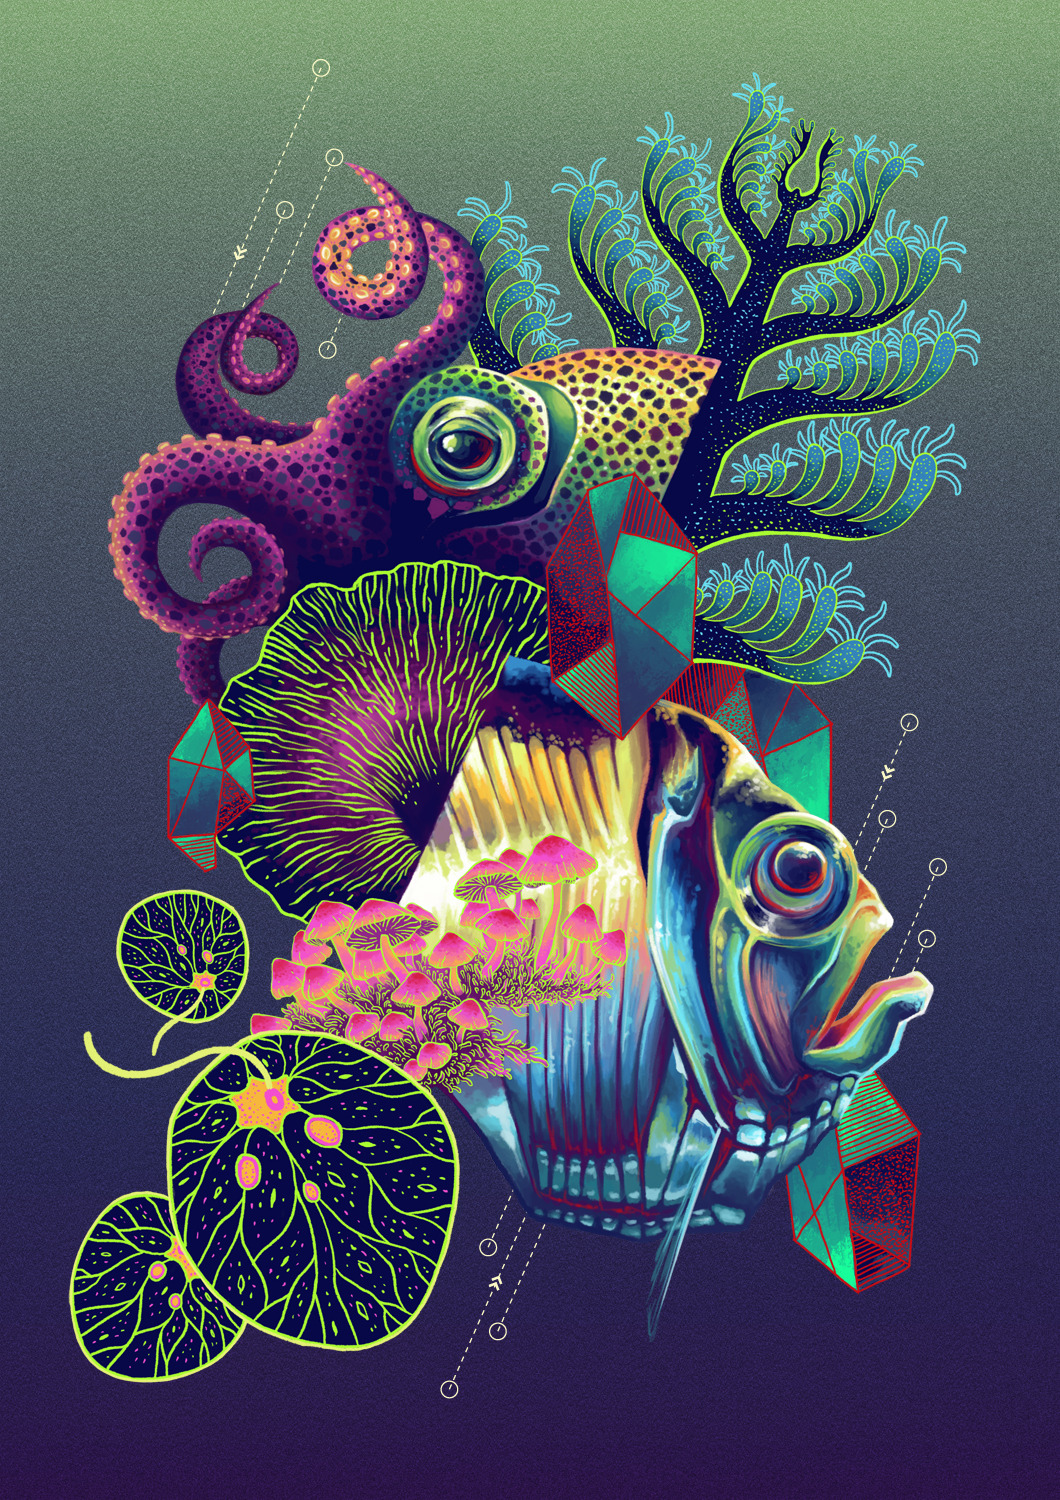 Luminescence emphasizes the textural appearance of light-emitting organisms, intensifying the subtle hints of colors on the usually bright but nearly monochromatic visuals. tumblr · instagram · behance · society6